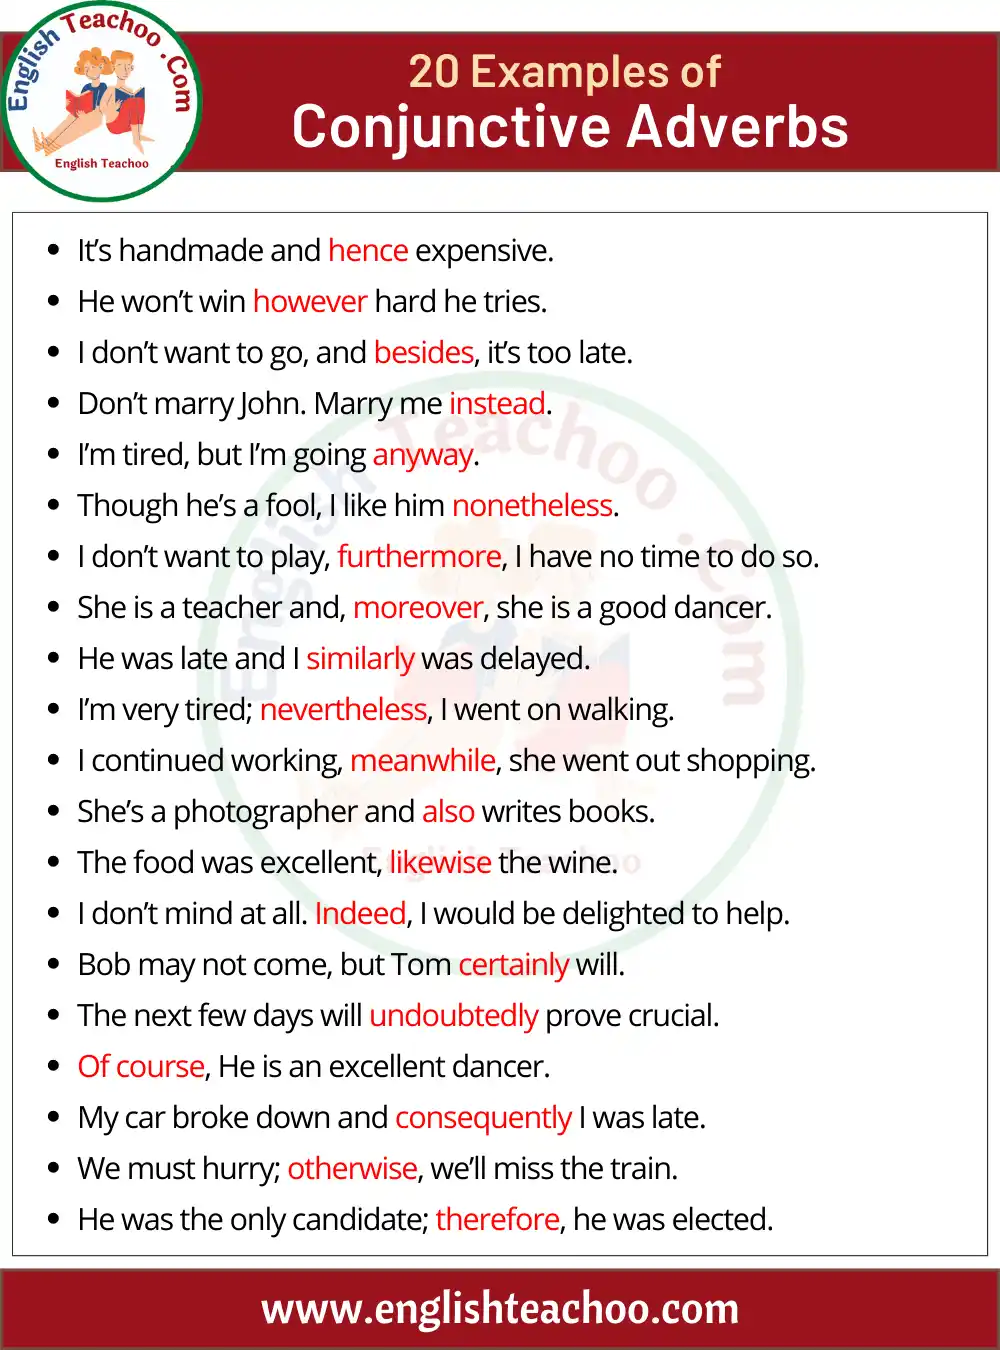 20 Examples of Conjunctive Adverbs In Sentences